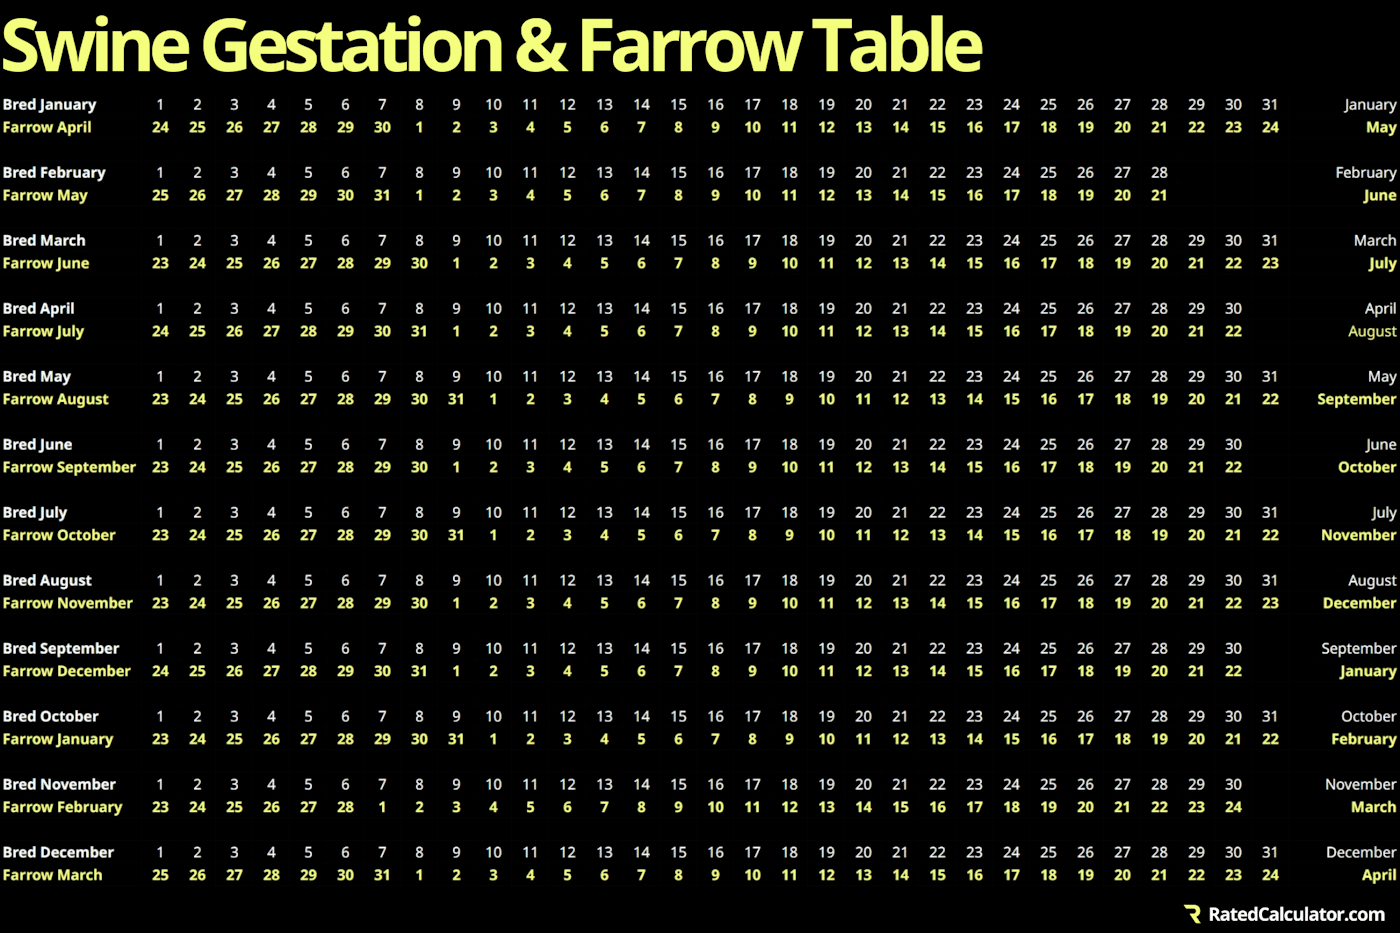 Swine gestation and farrow table for the entire year